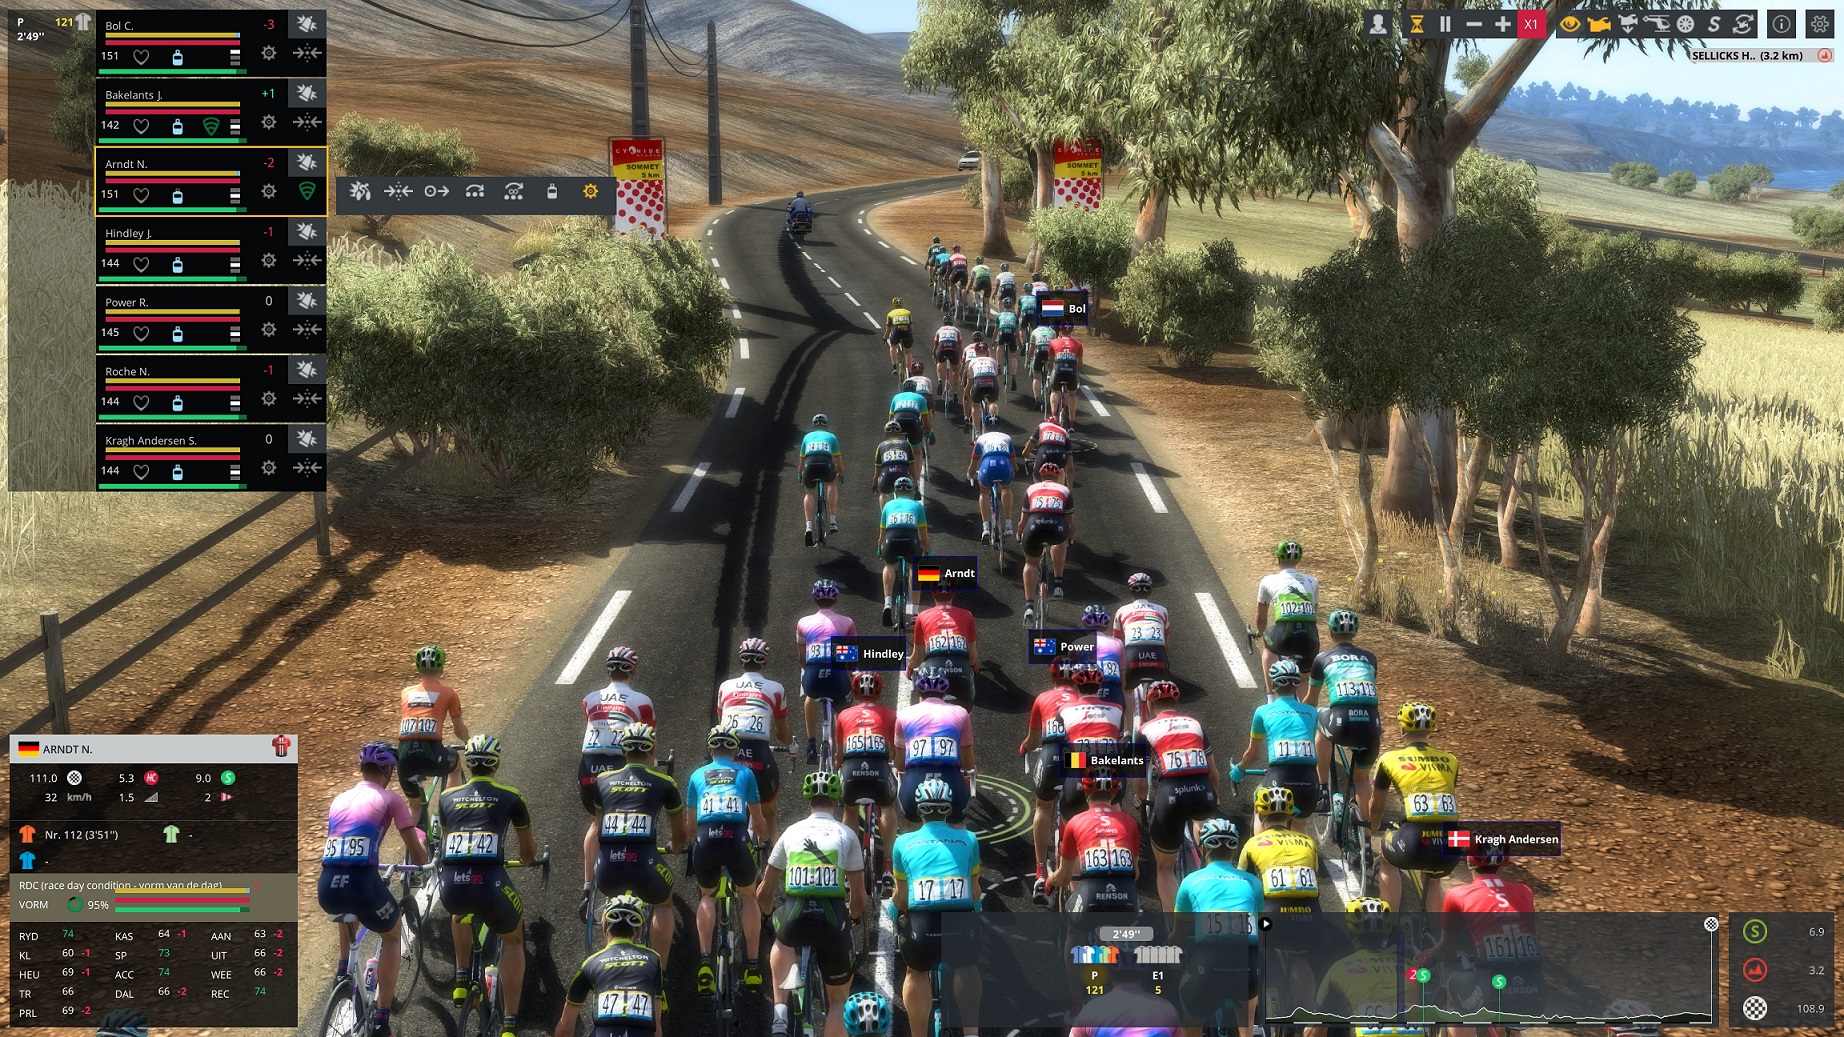 Buy Pro Cycling Manager 2019 Steam